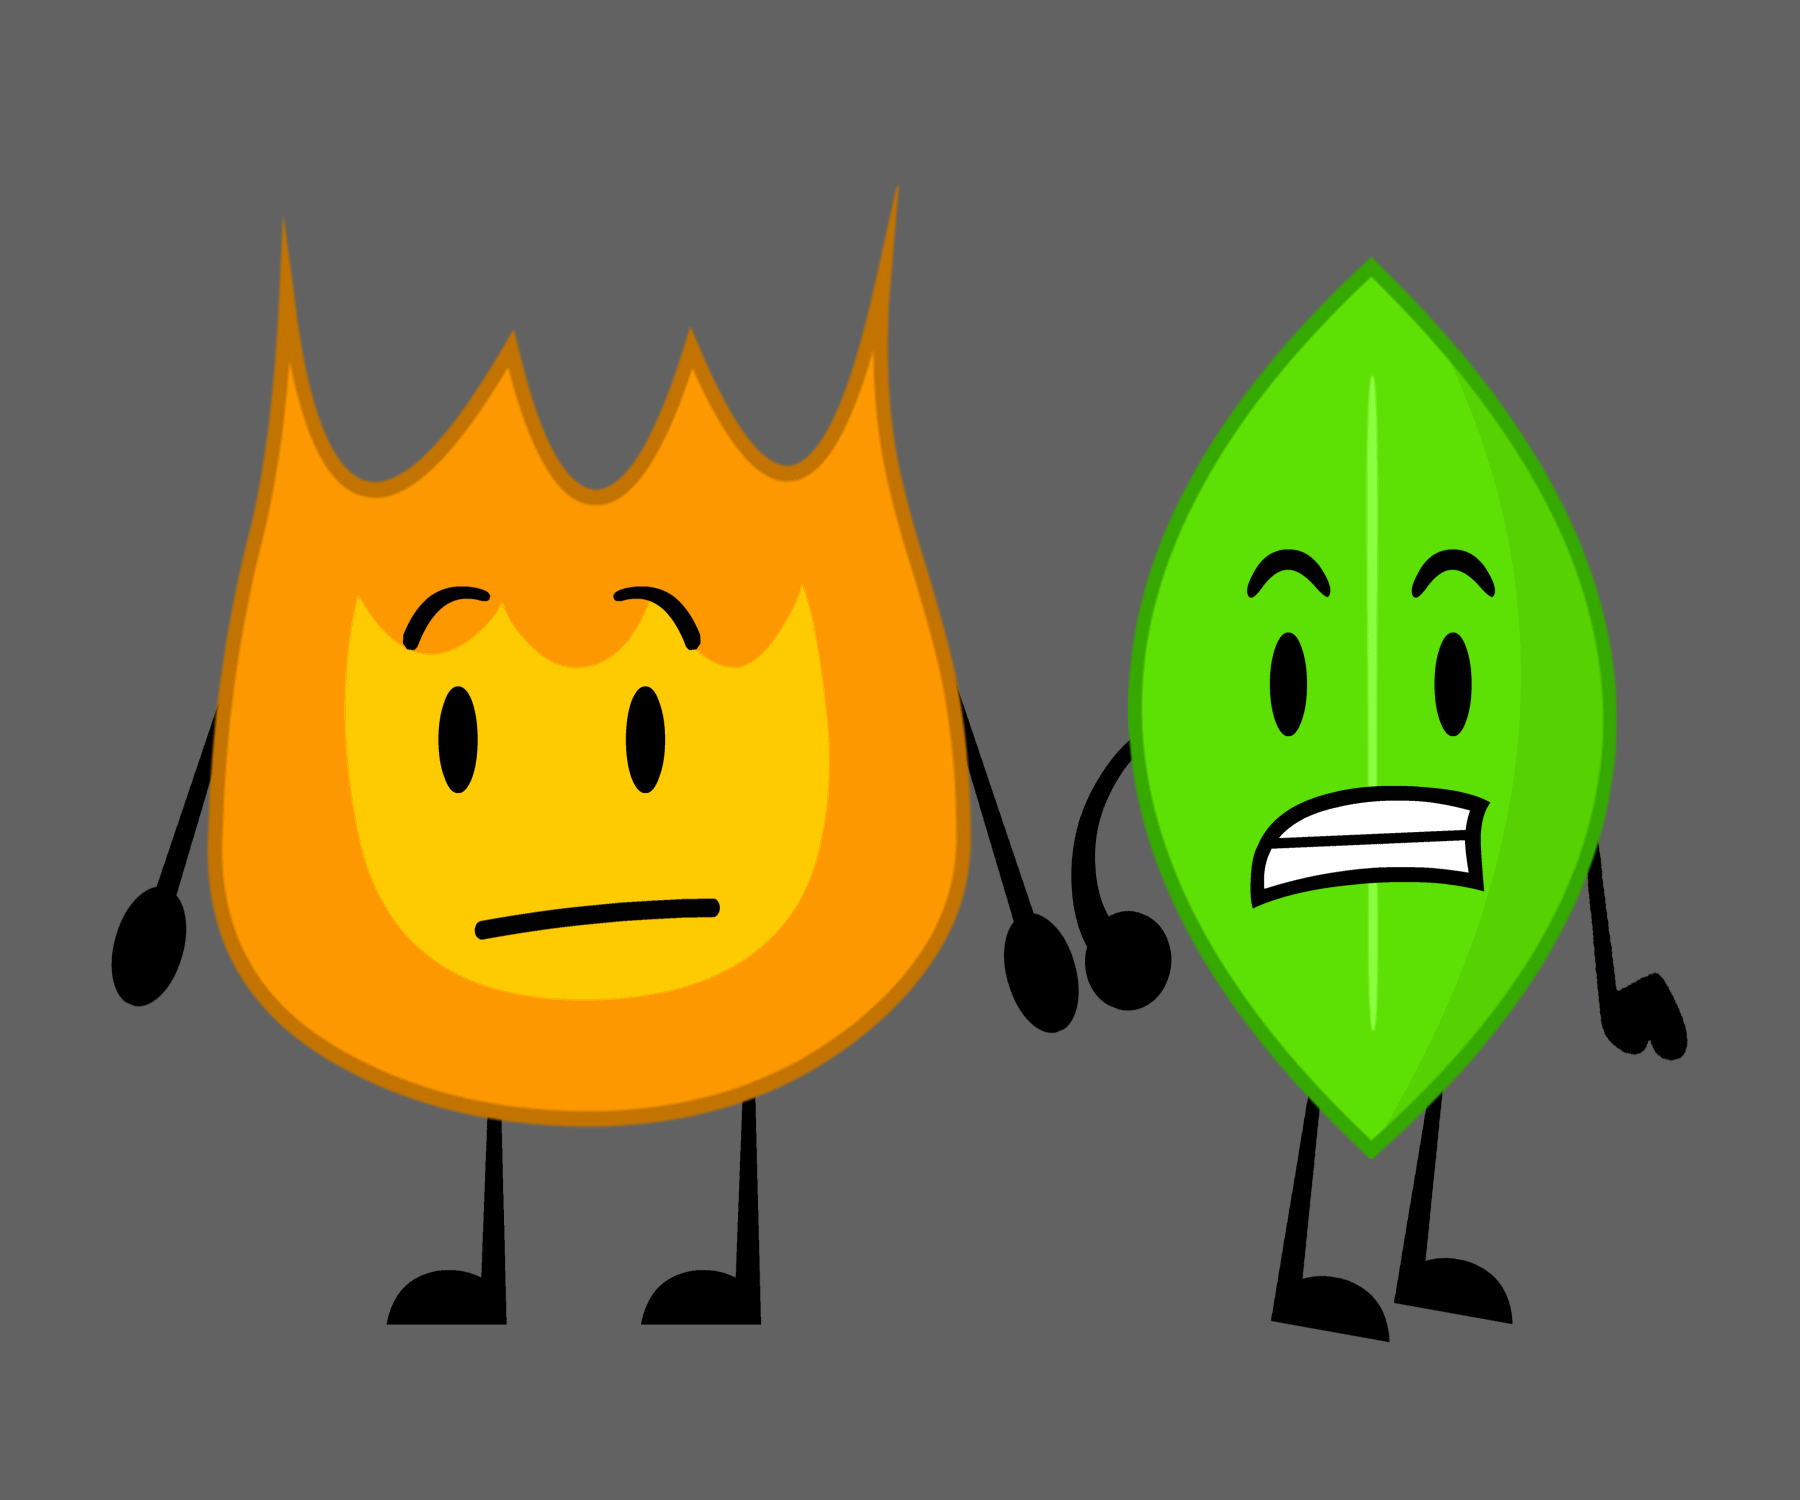 Bfb Leafy and Firey. 